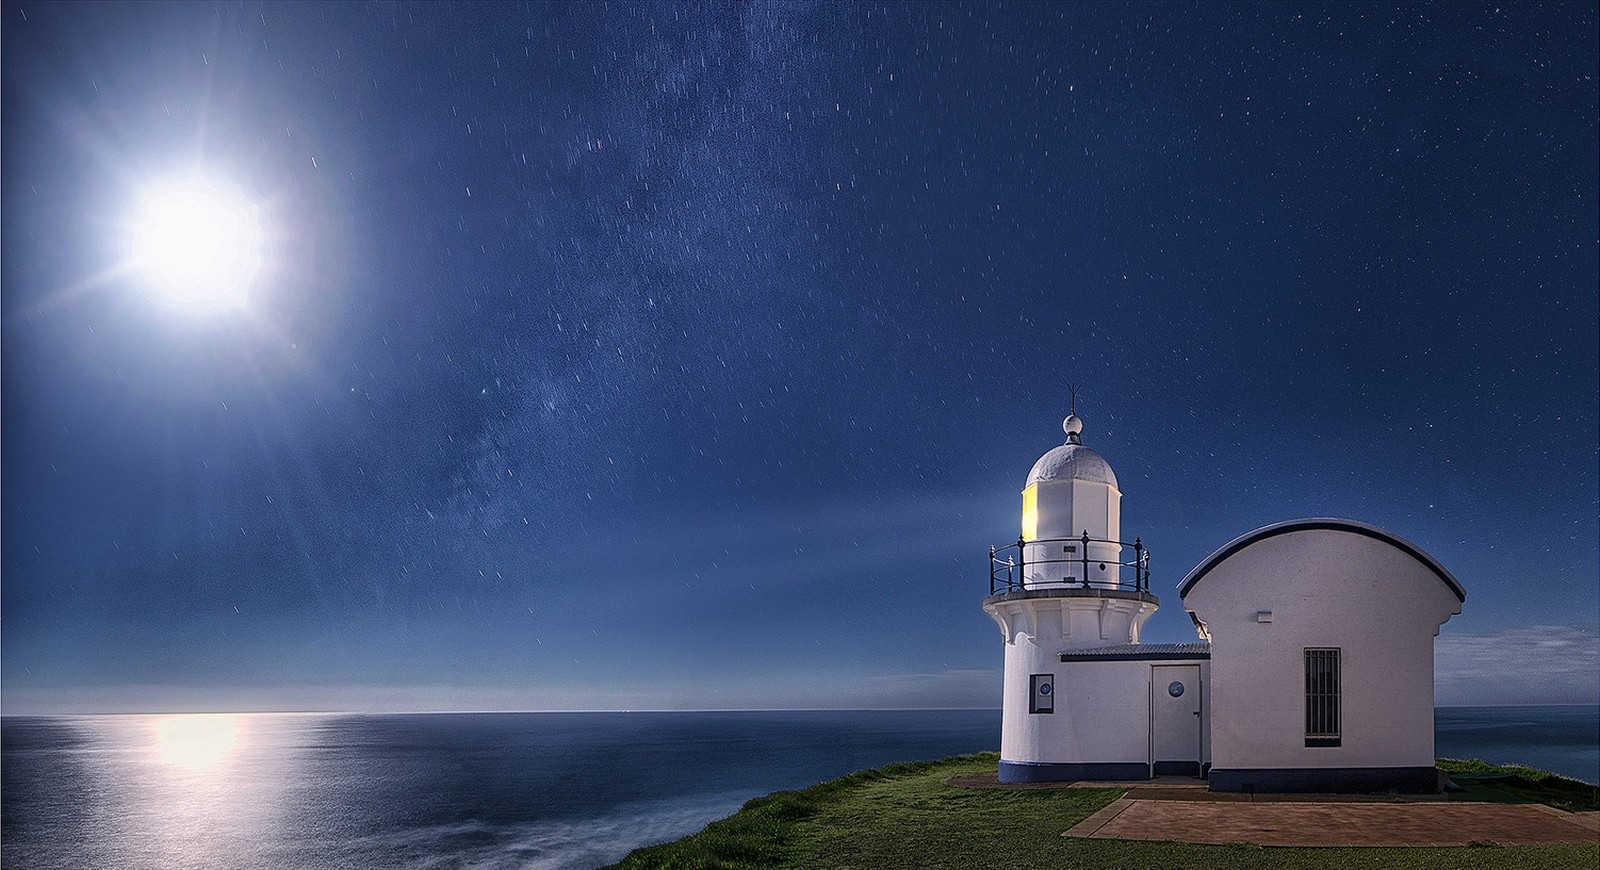 General 1600x870 Moon starry night sea moonlight reflection lighthouse space blue nature landscape